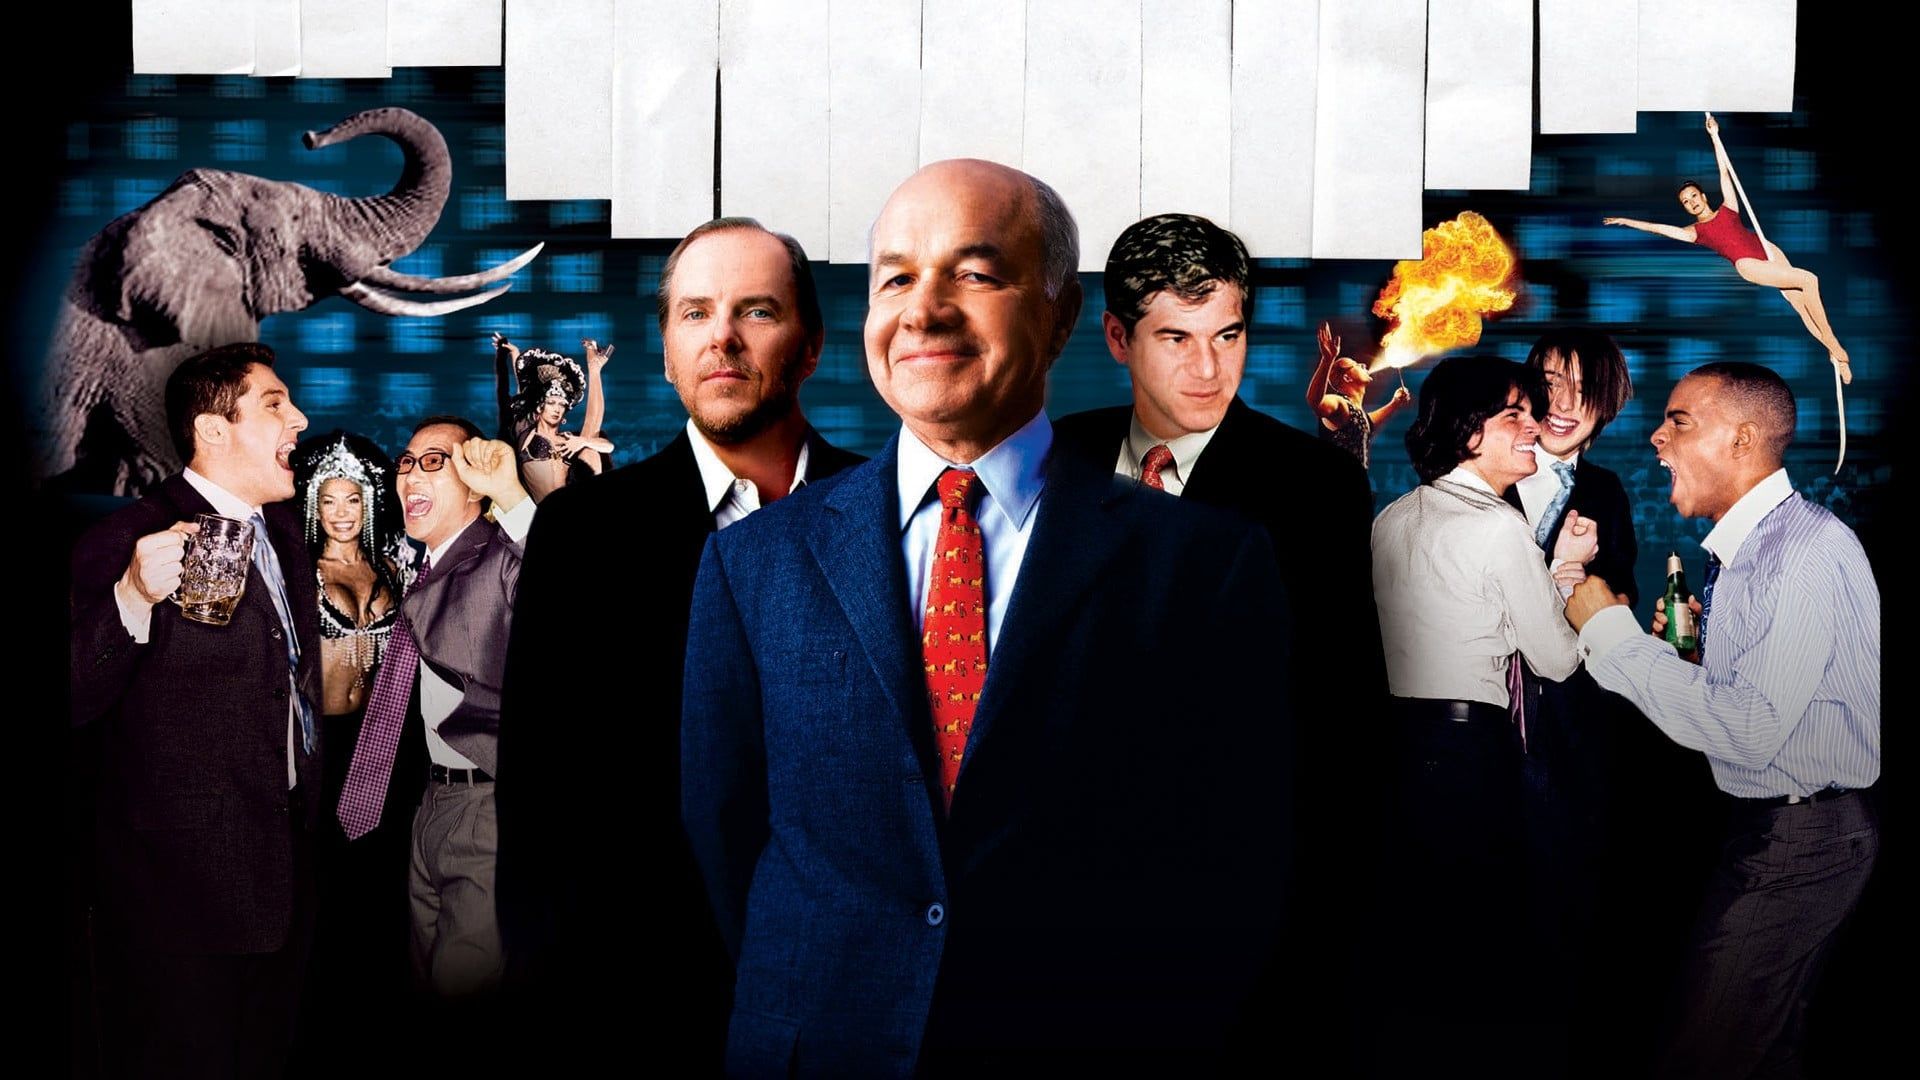 Enron: The Smartest Guys in the Room background